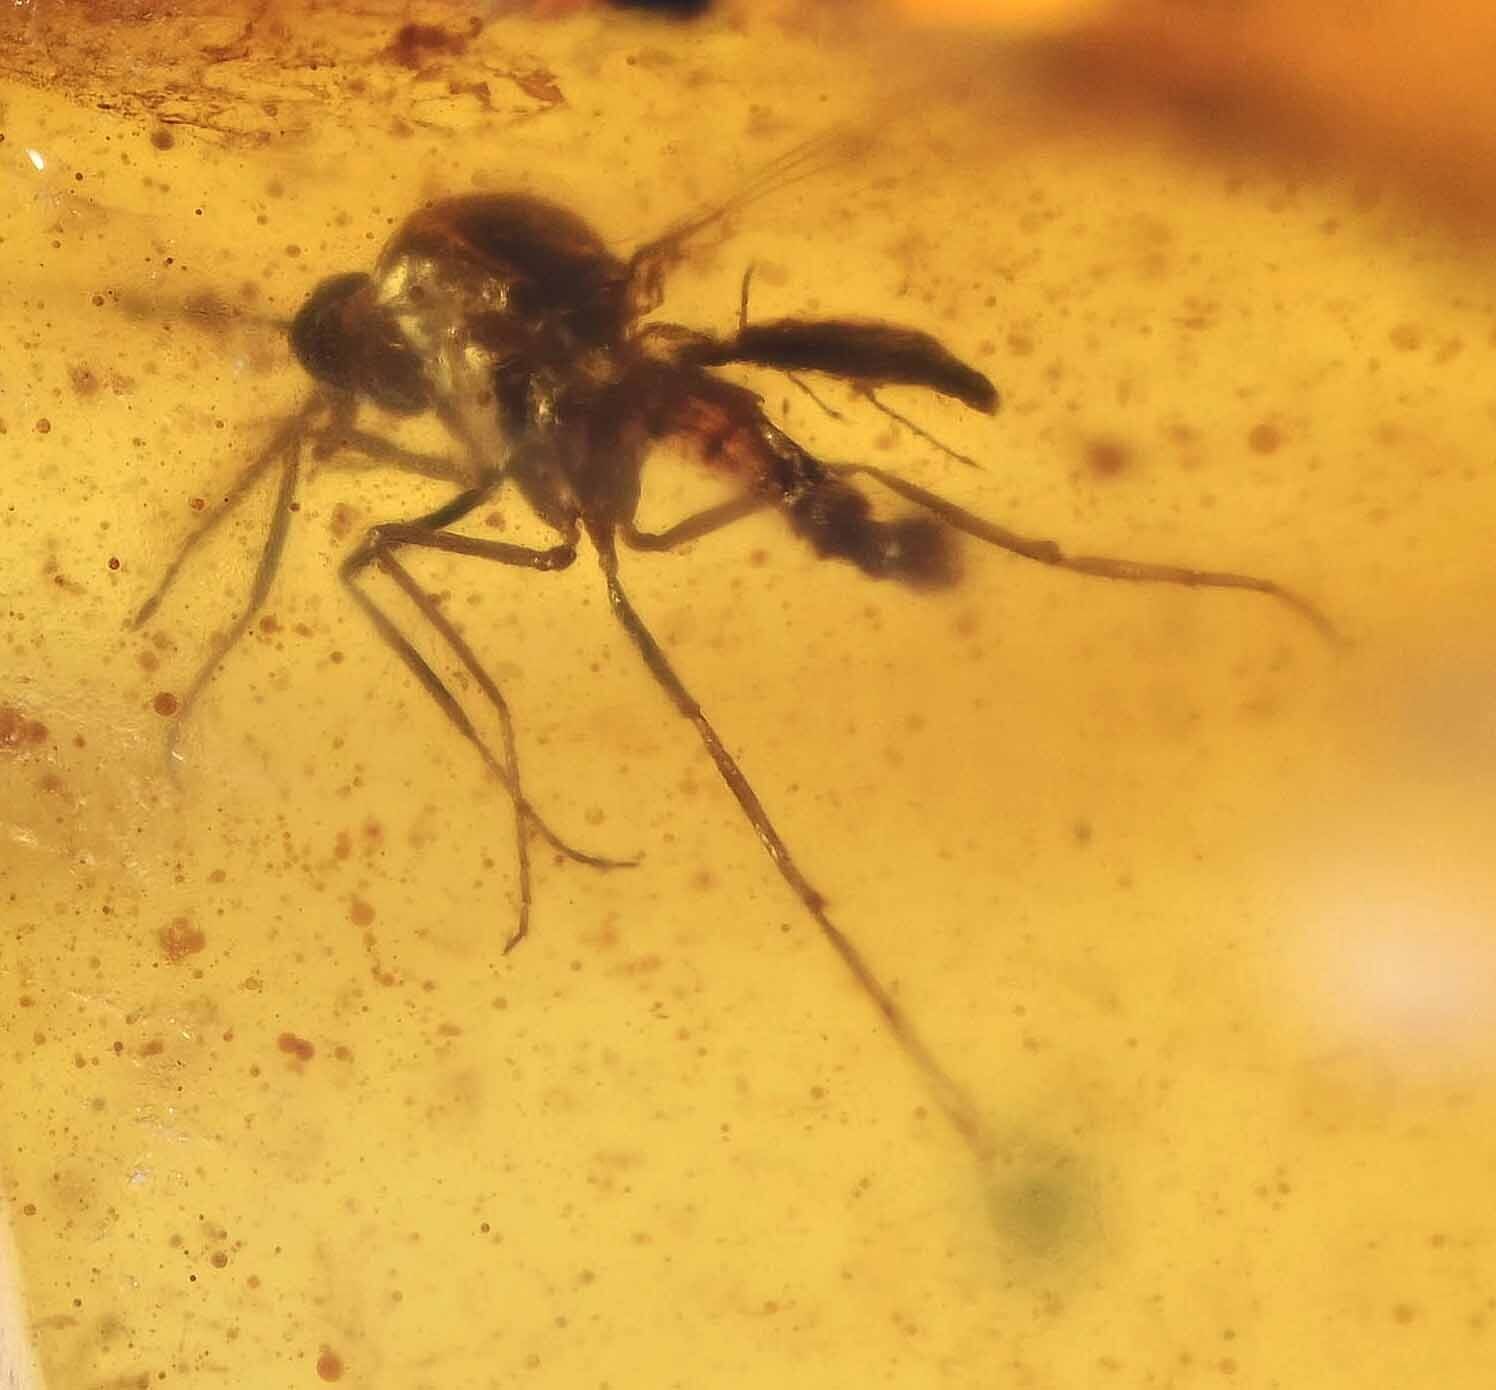 Parasitic or Phoretic Mite on Gnat, Fossil inclusion in Burmese Amber